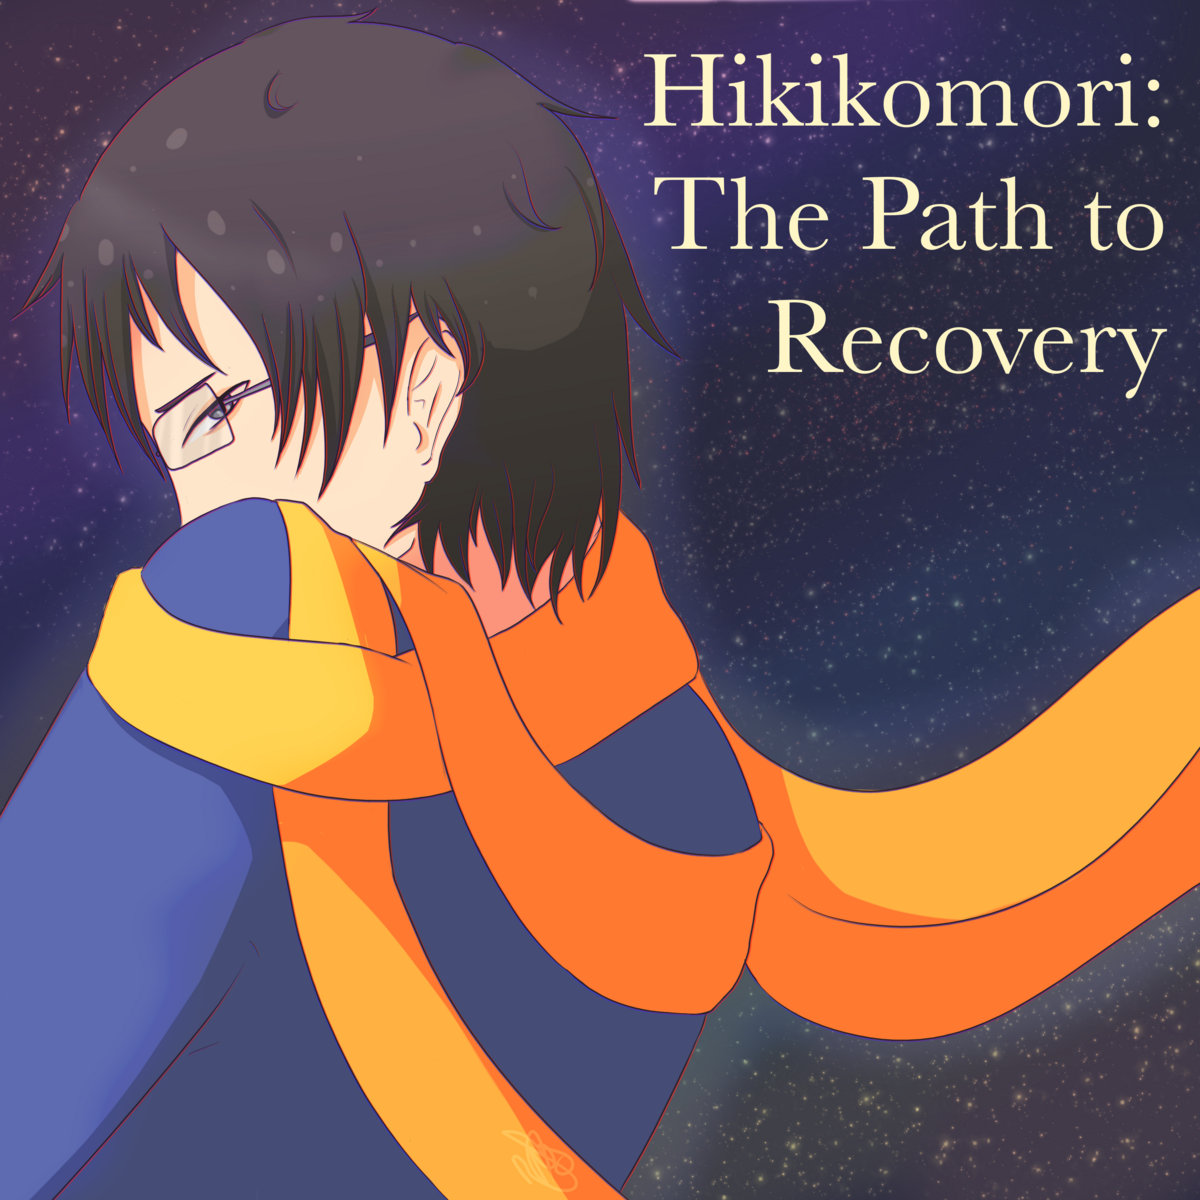 should've stayed a lurker — What Makes a Hikikomori Hero?